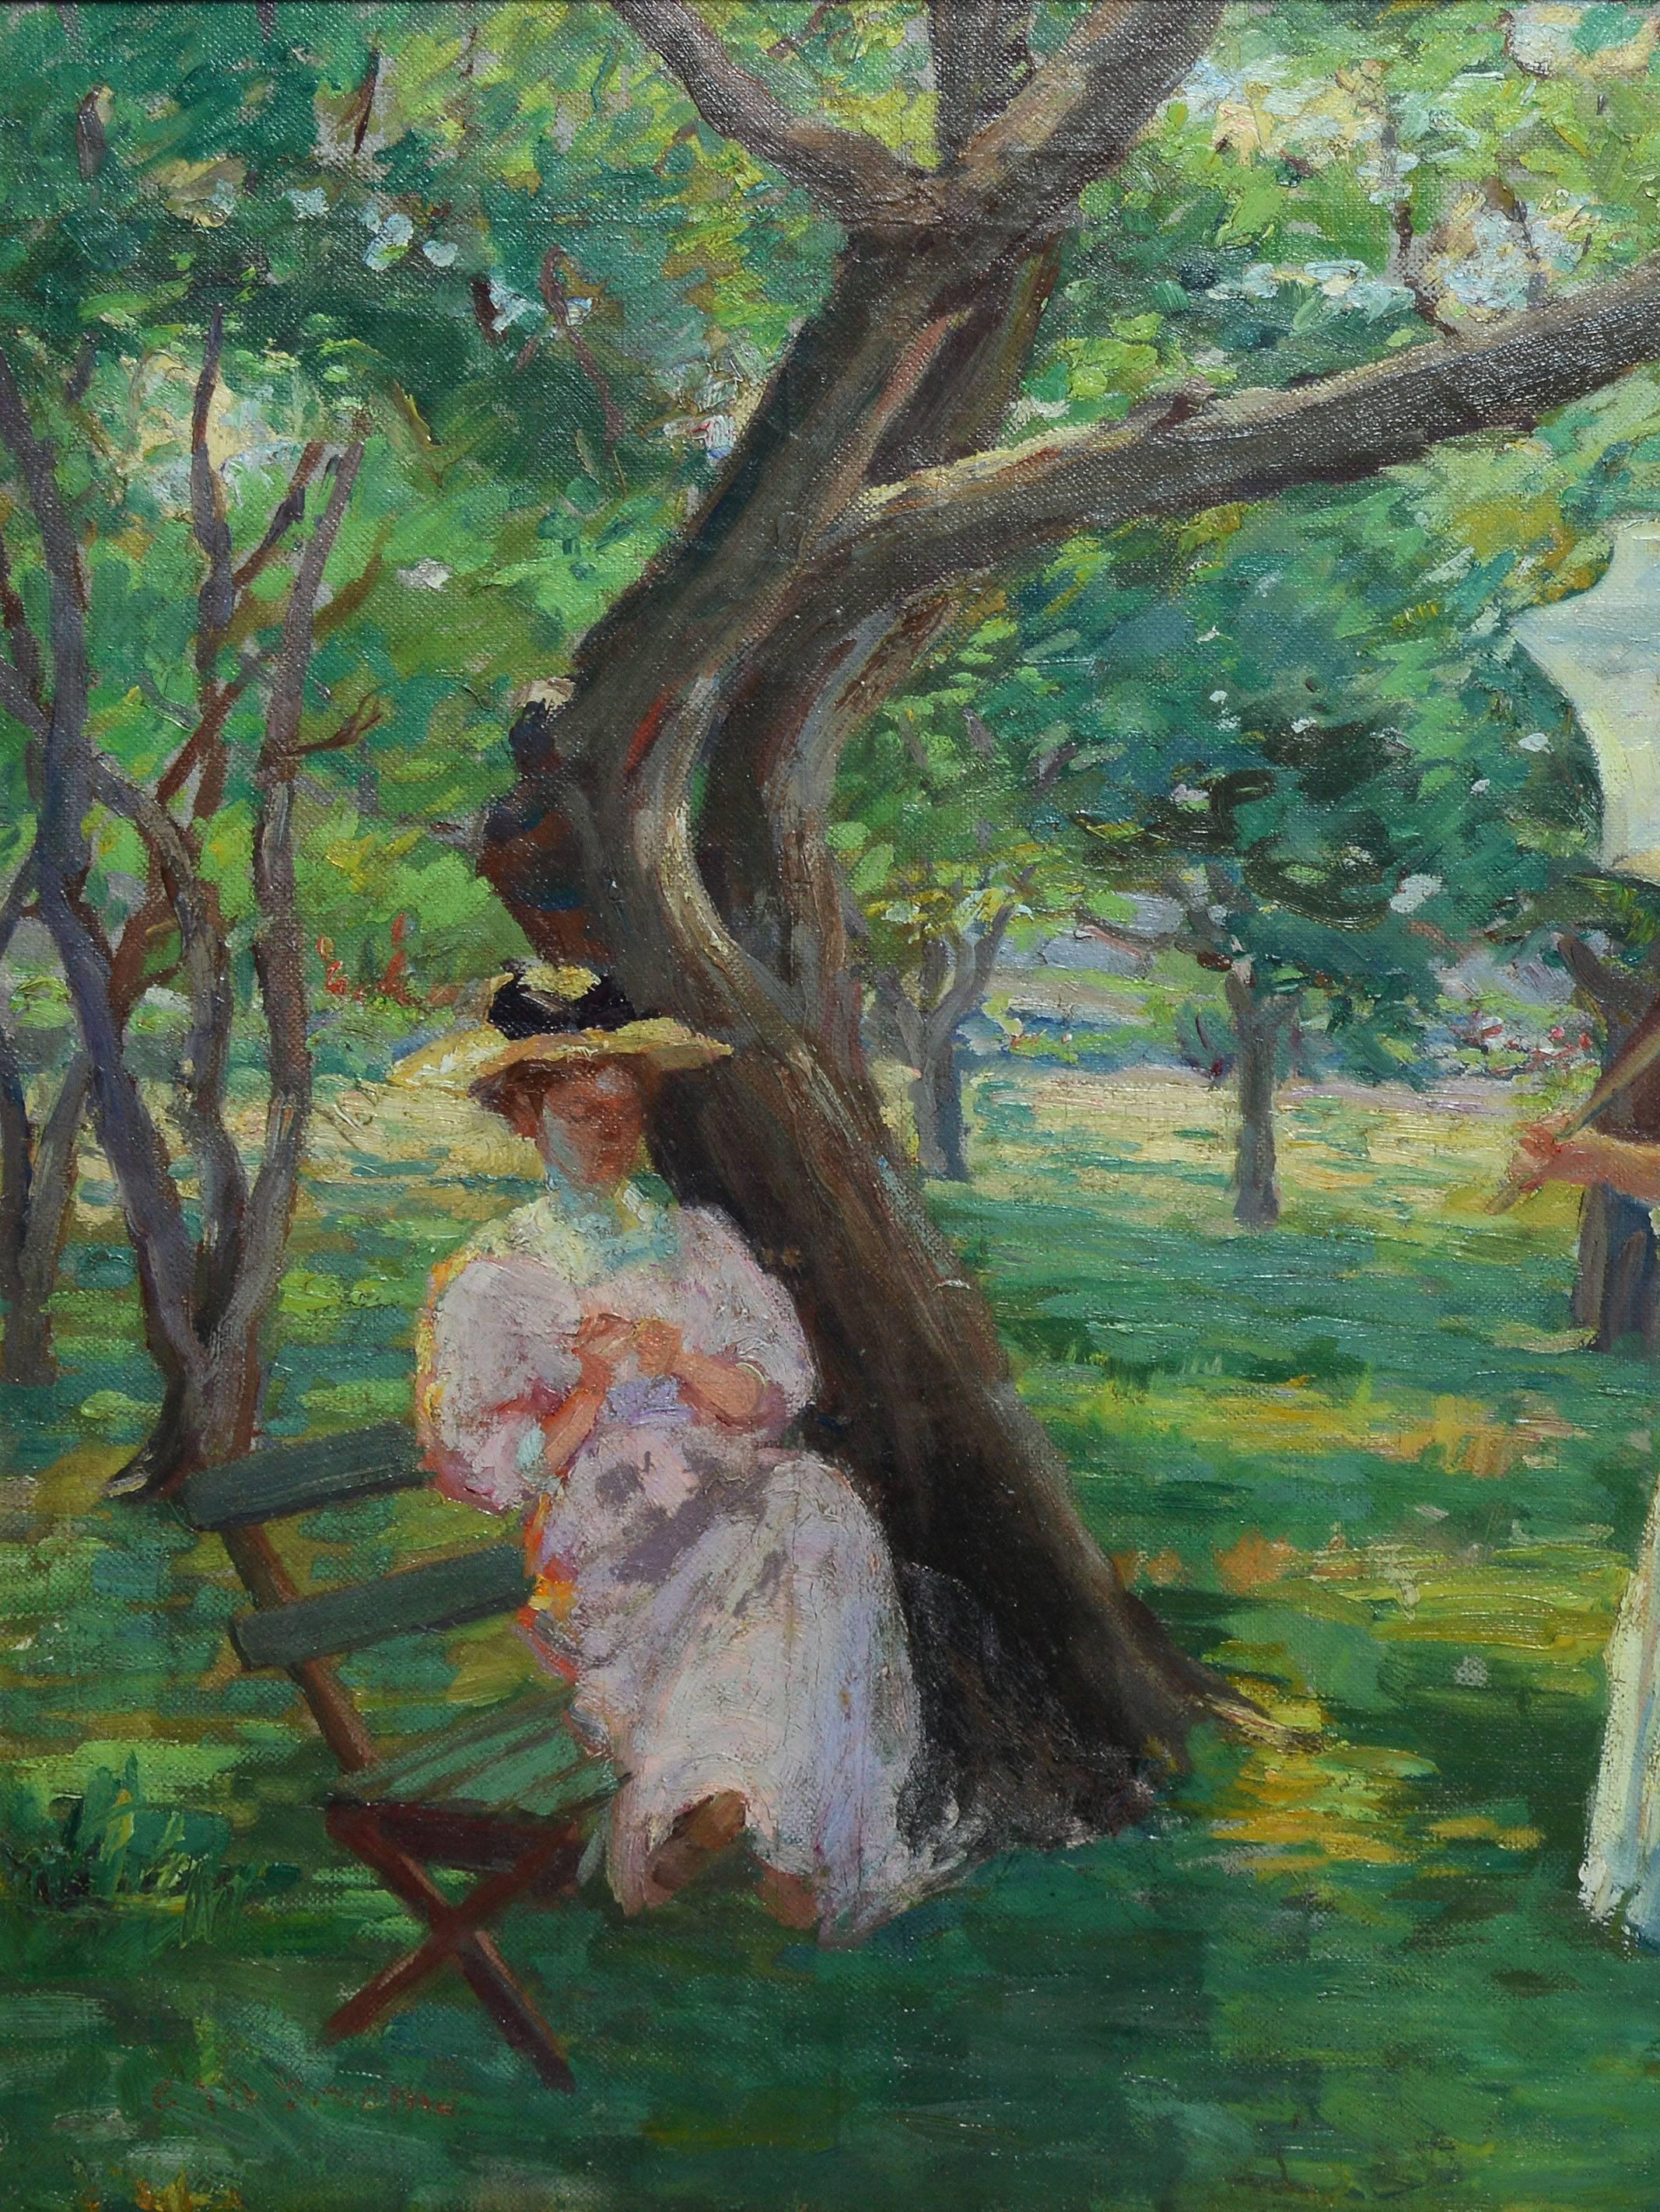 19th century Impressionist oil painting of two women in a park. Oil on canvas, circa 1900. Signed illegibly lower left. Displayed in giltwood frame.  Image, 27